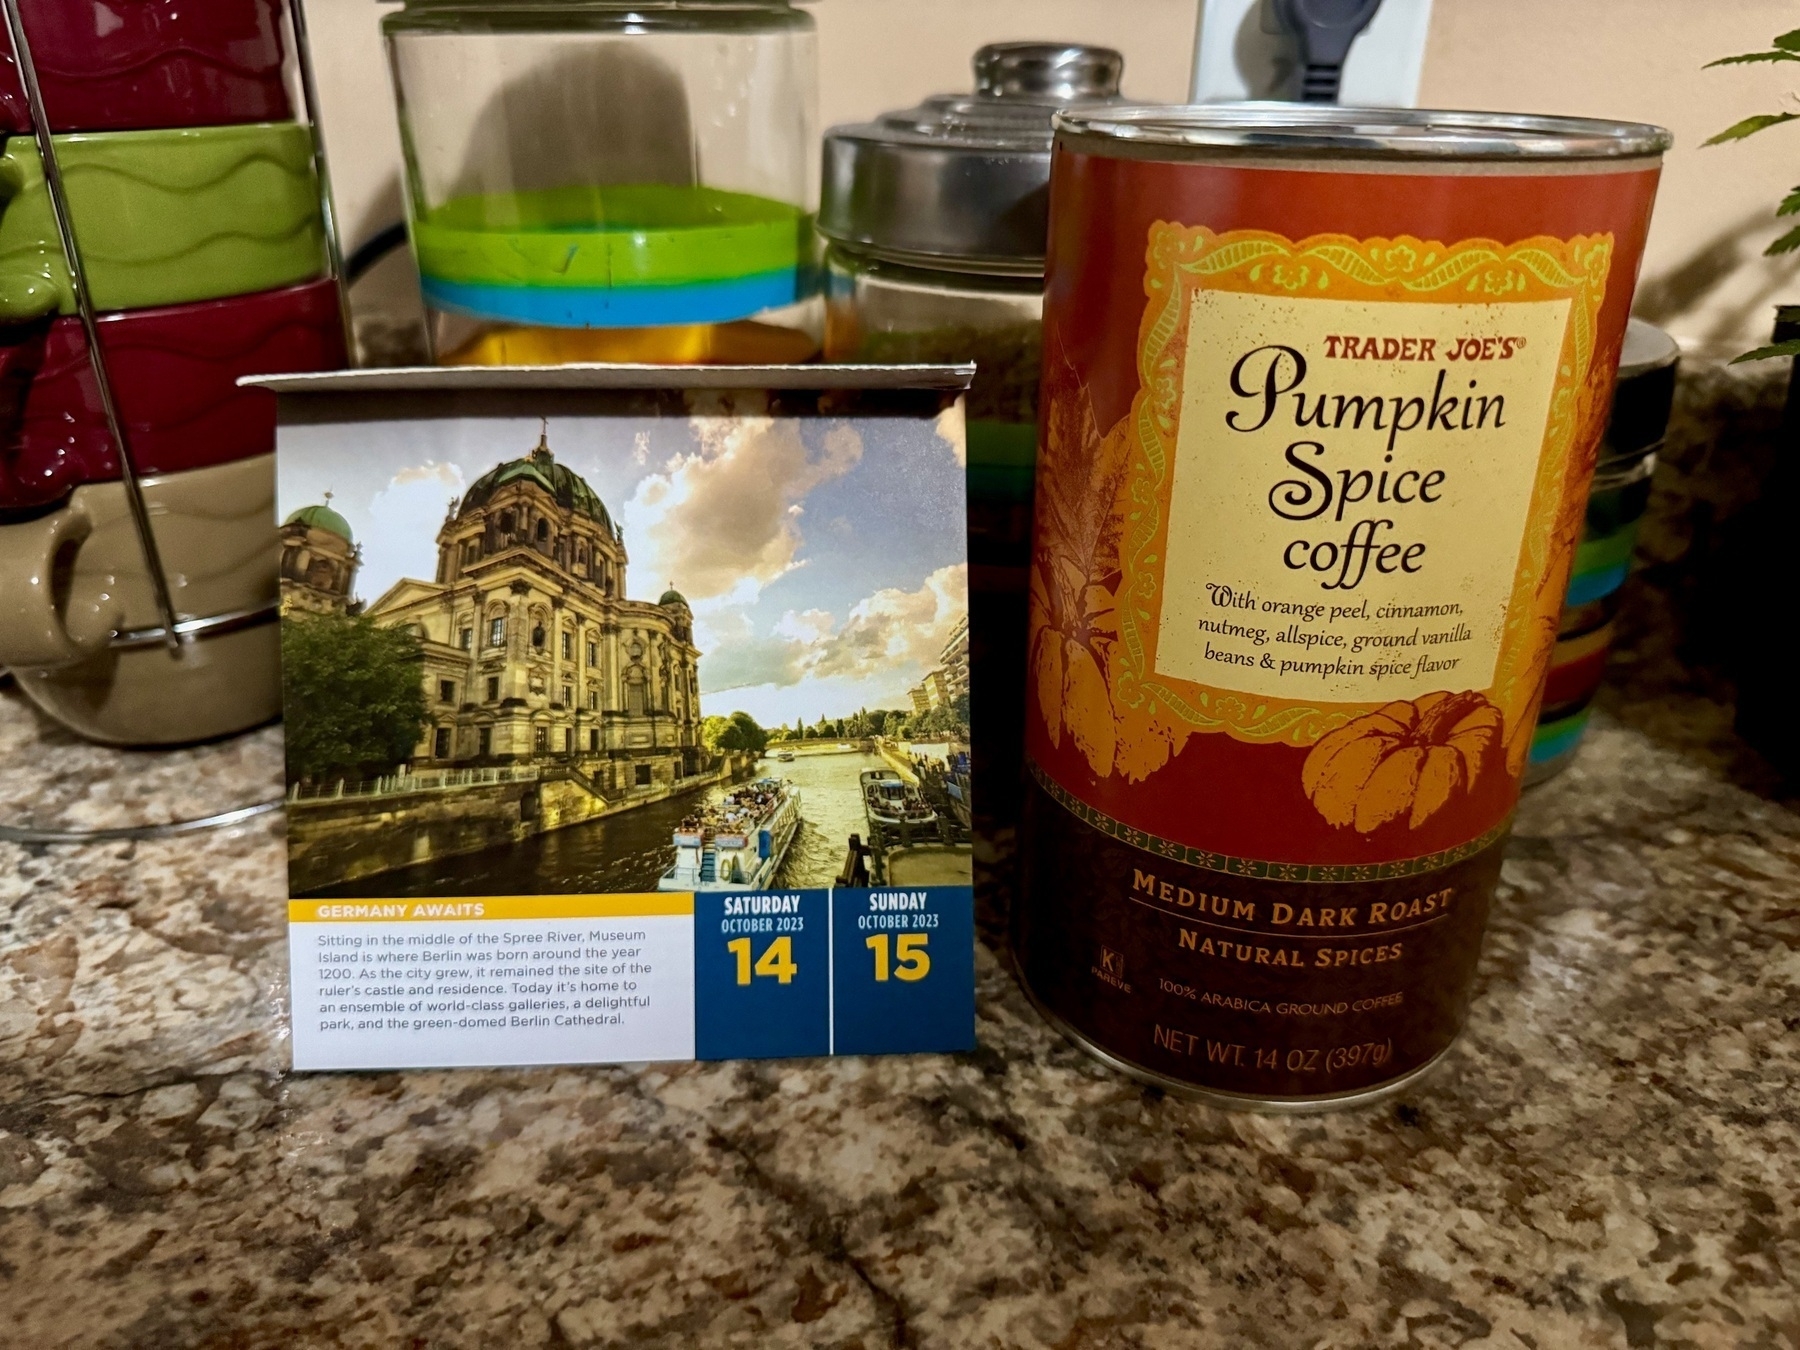 Photo of a container of Trader Joe's pumpkin spice coffee on the right side (on top of a kitchen counter, the 'fake' marbled pattern in various shades of brown), next to a calendar-book featuring a photo of a museum in Germany (it's a Rick Steve calendar).